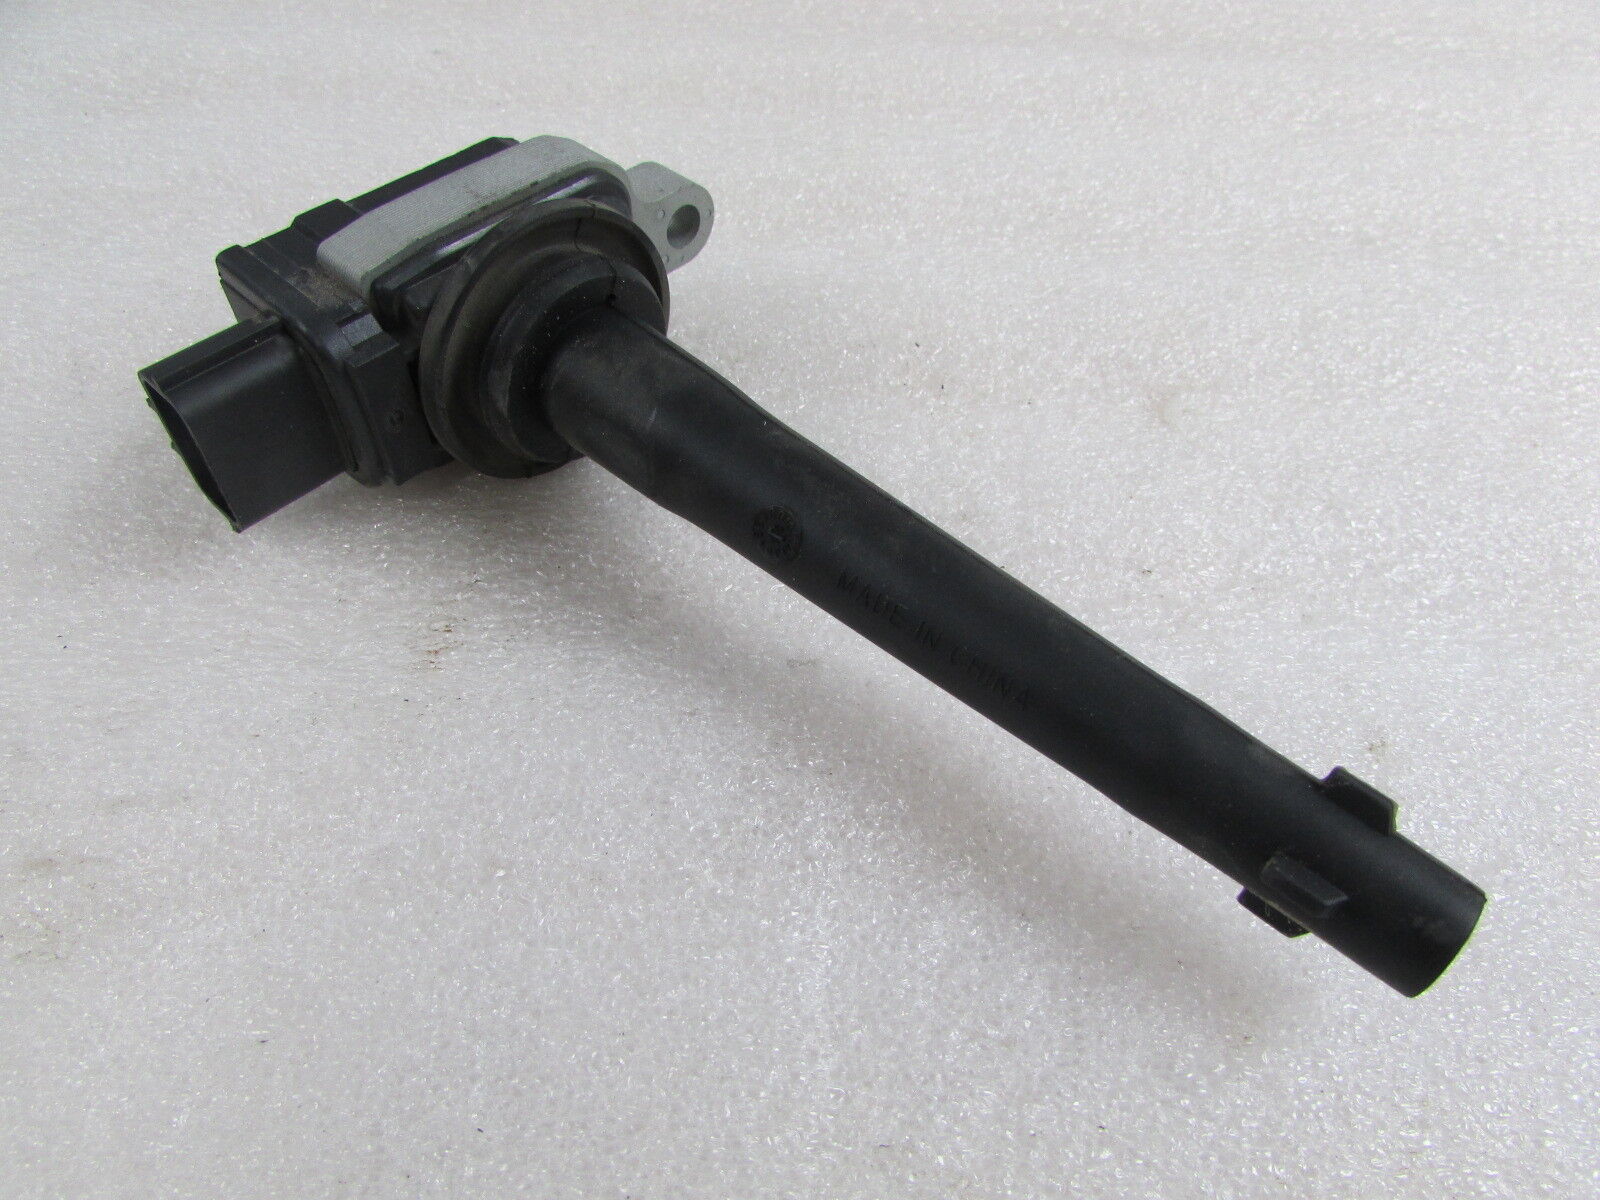 McLaren 720S, Ignition Coil, Used, P/N 220703040